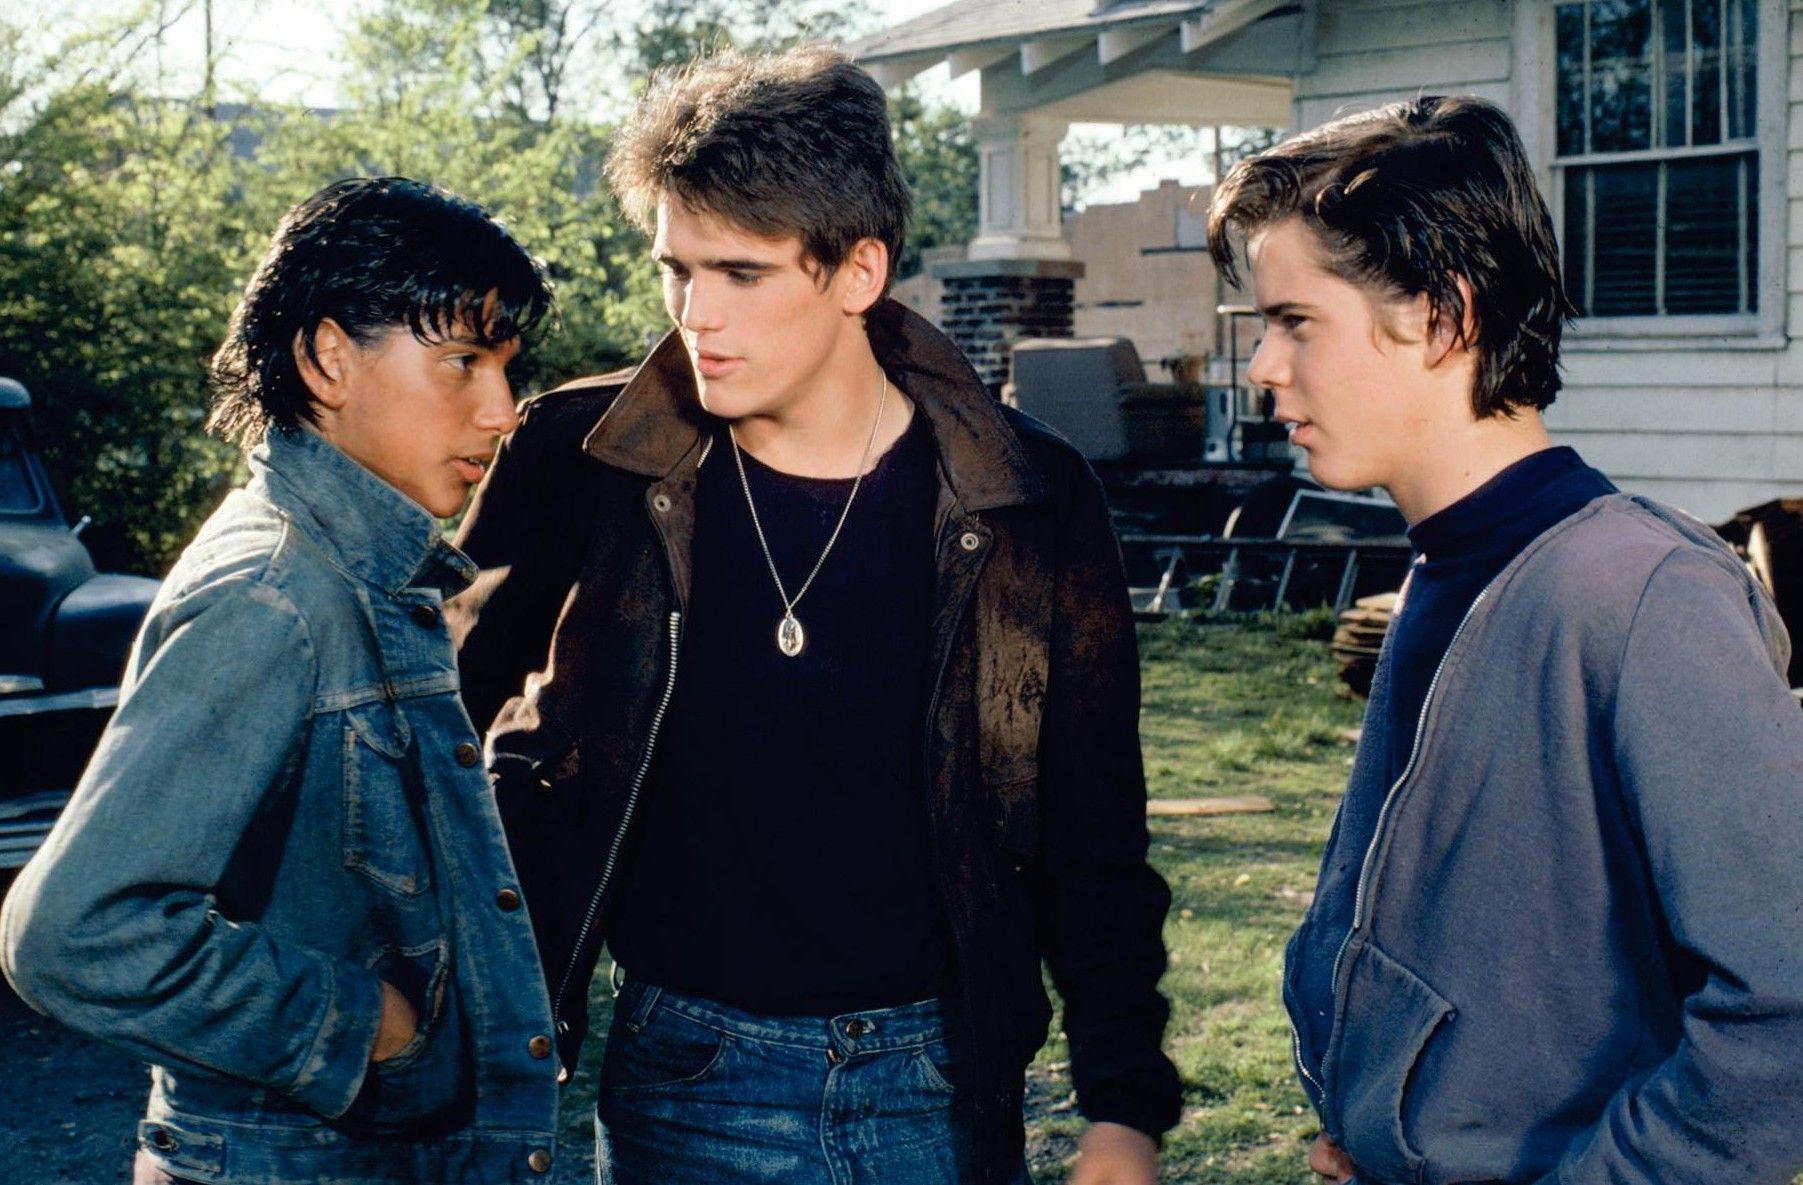 Johnny Cade, Dallas Winston, and Ponyboy Curtis. The outsiders